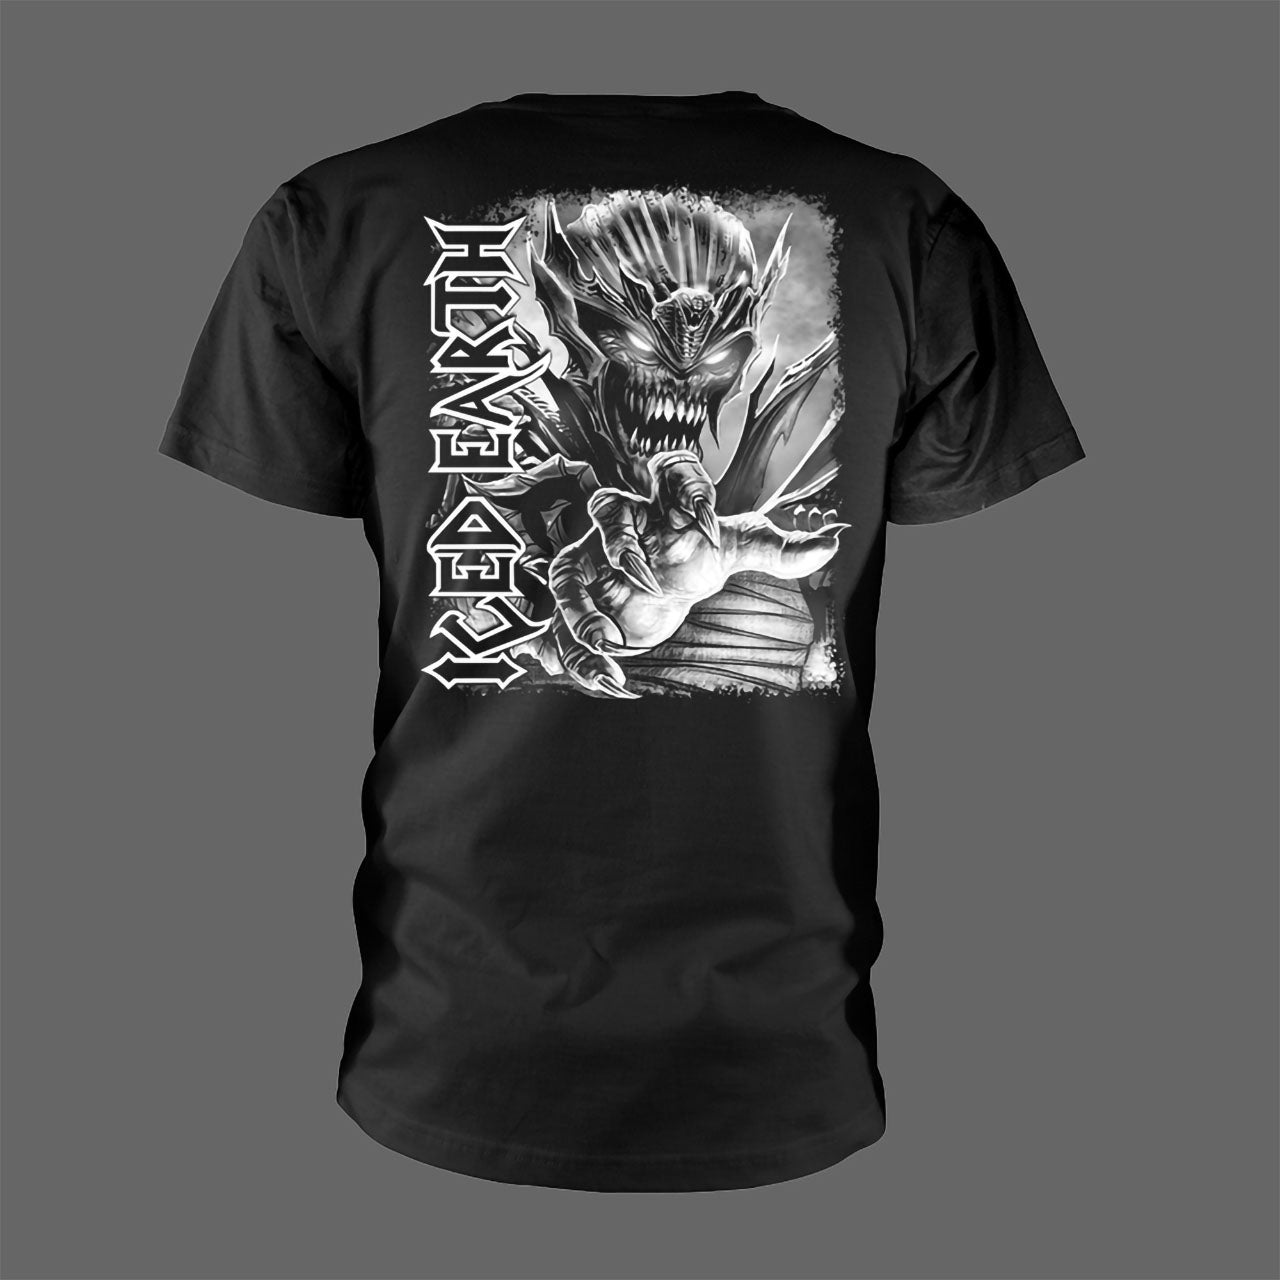 Iced Earth - Dystopia (T-Shirt)